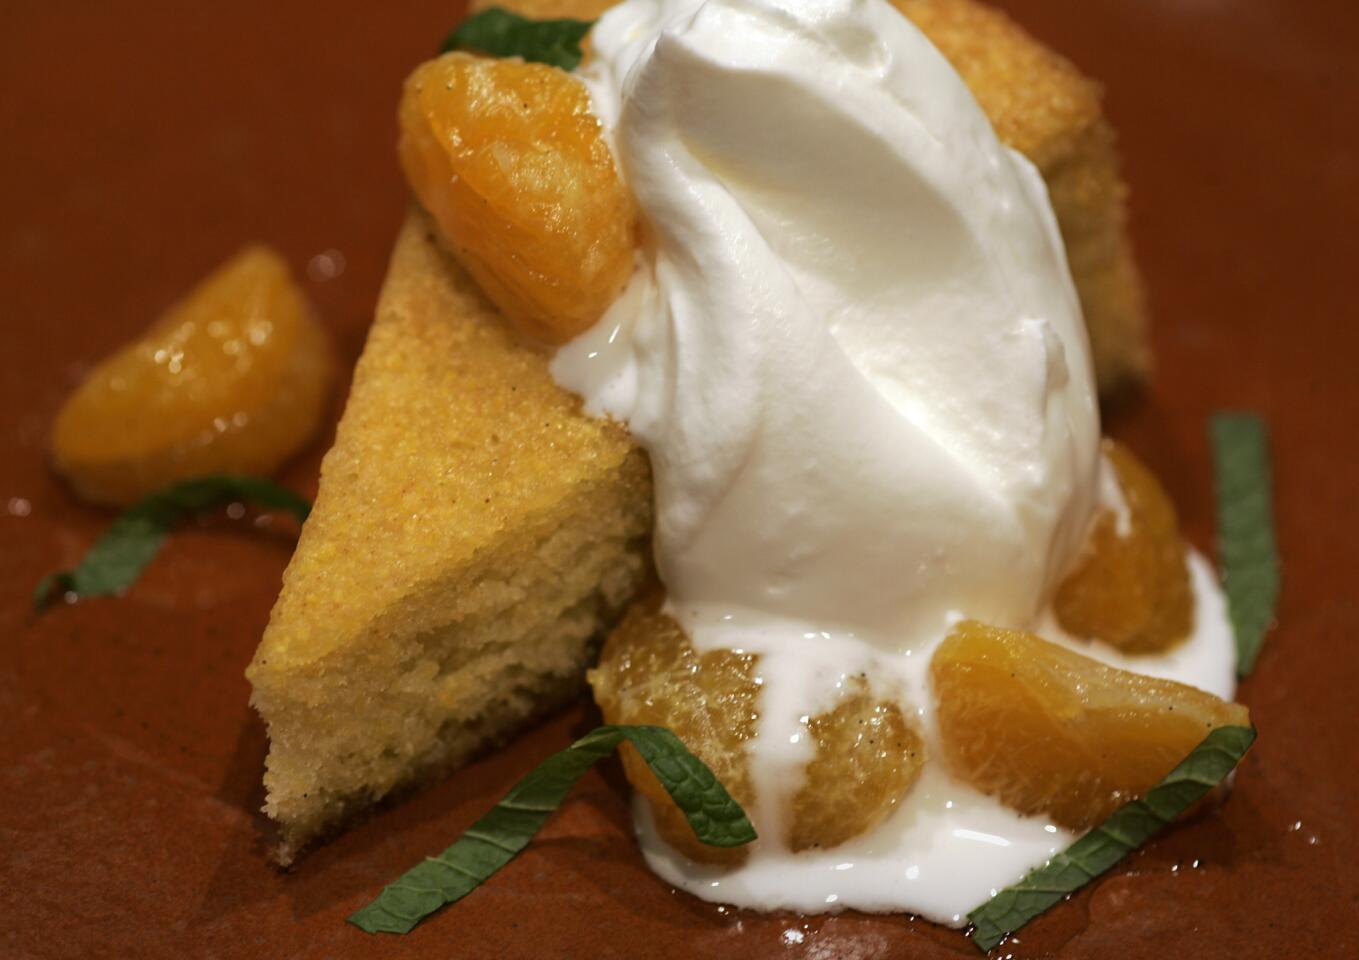 Olive oil cake with creme fraiche and candied tangerines